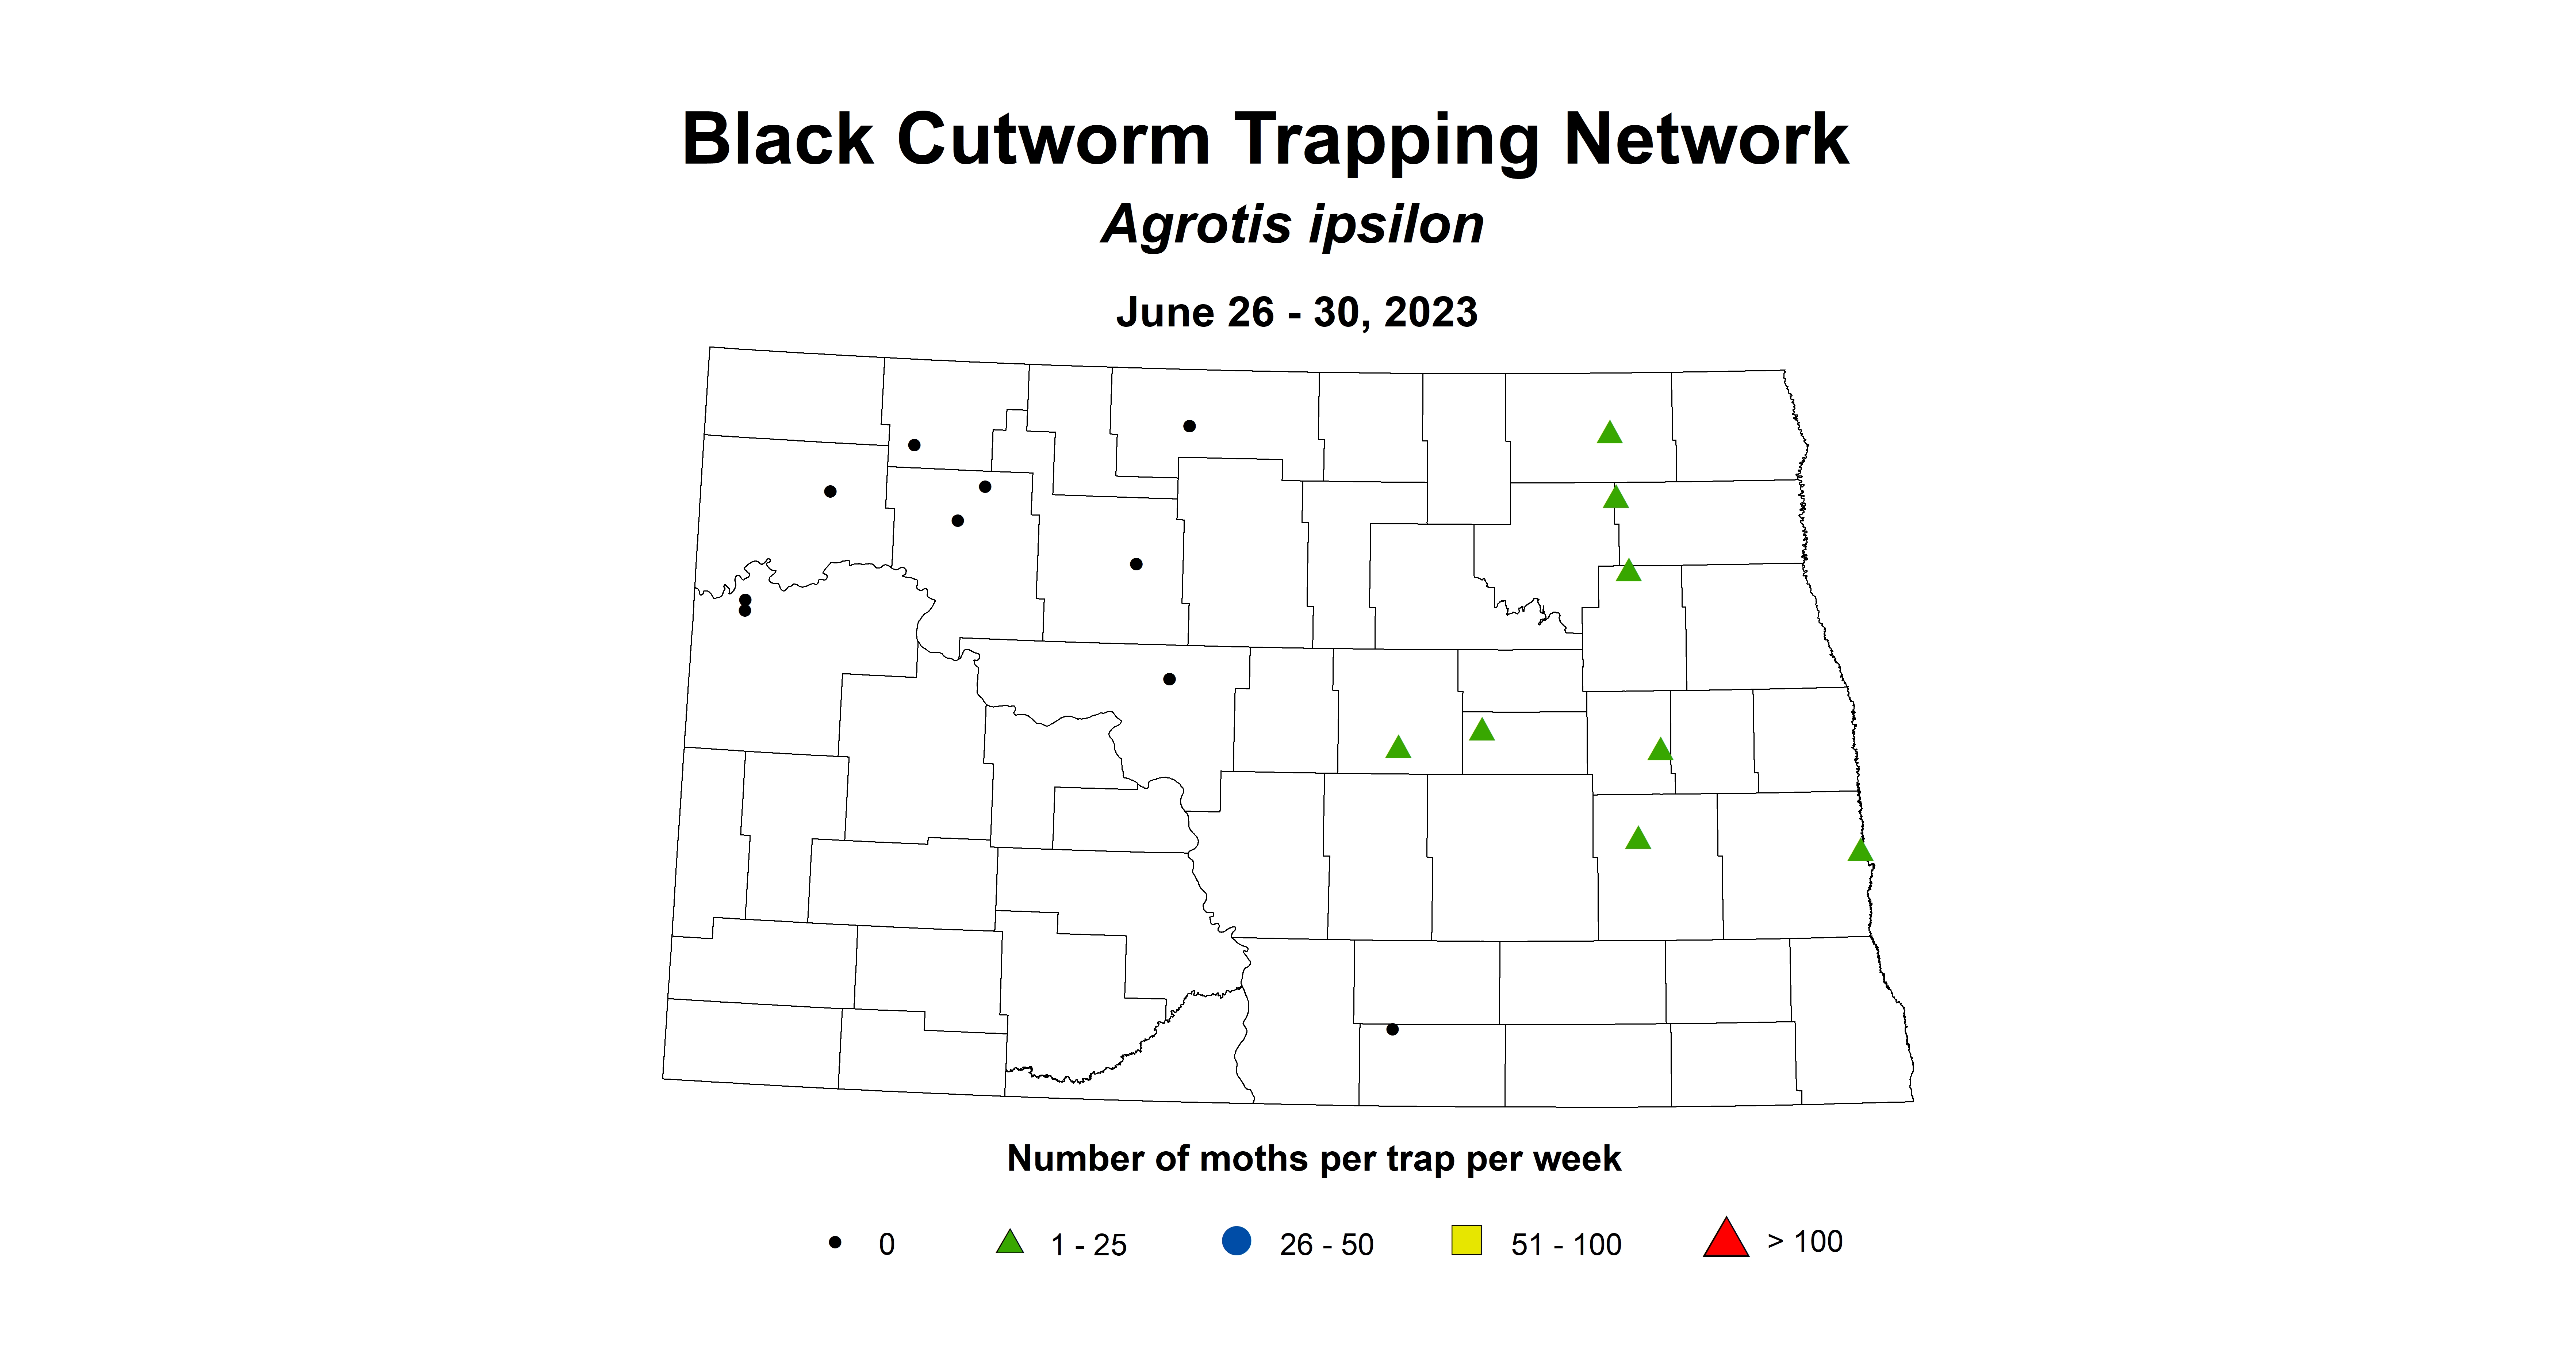 wheat insect trap black cutworm June 26-30 2023